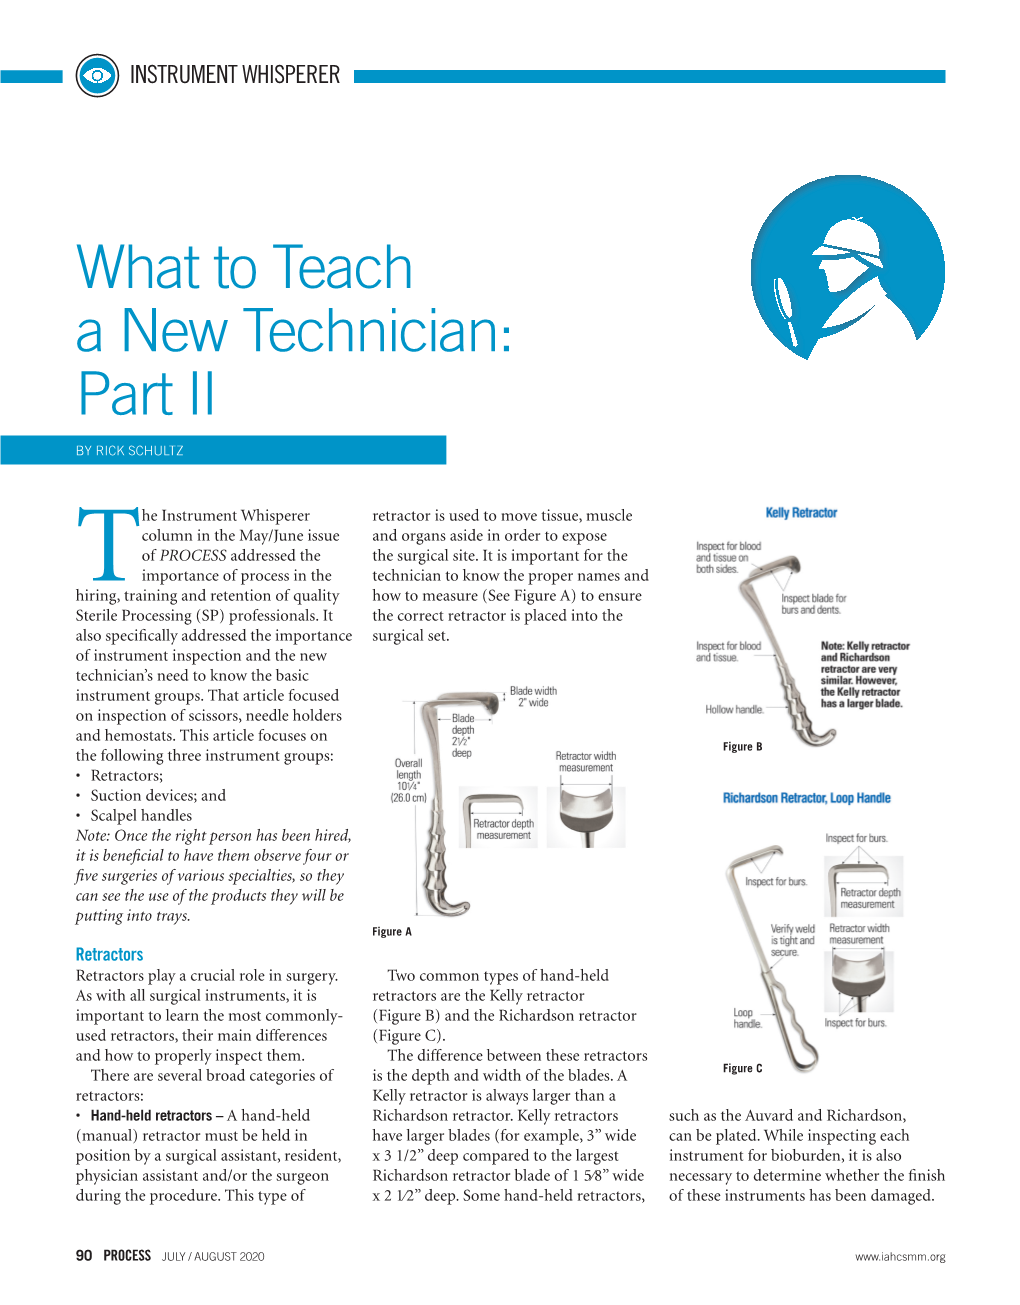 What to Teach a New Technician: Part II